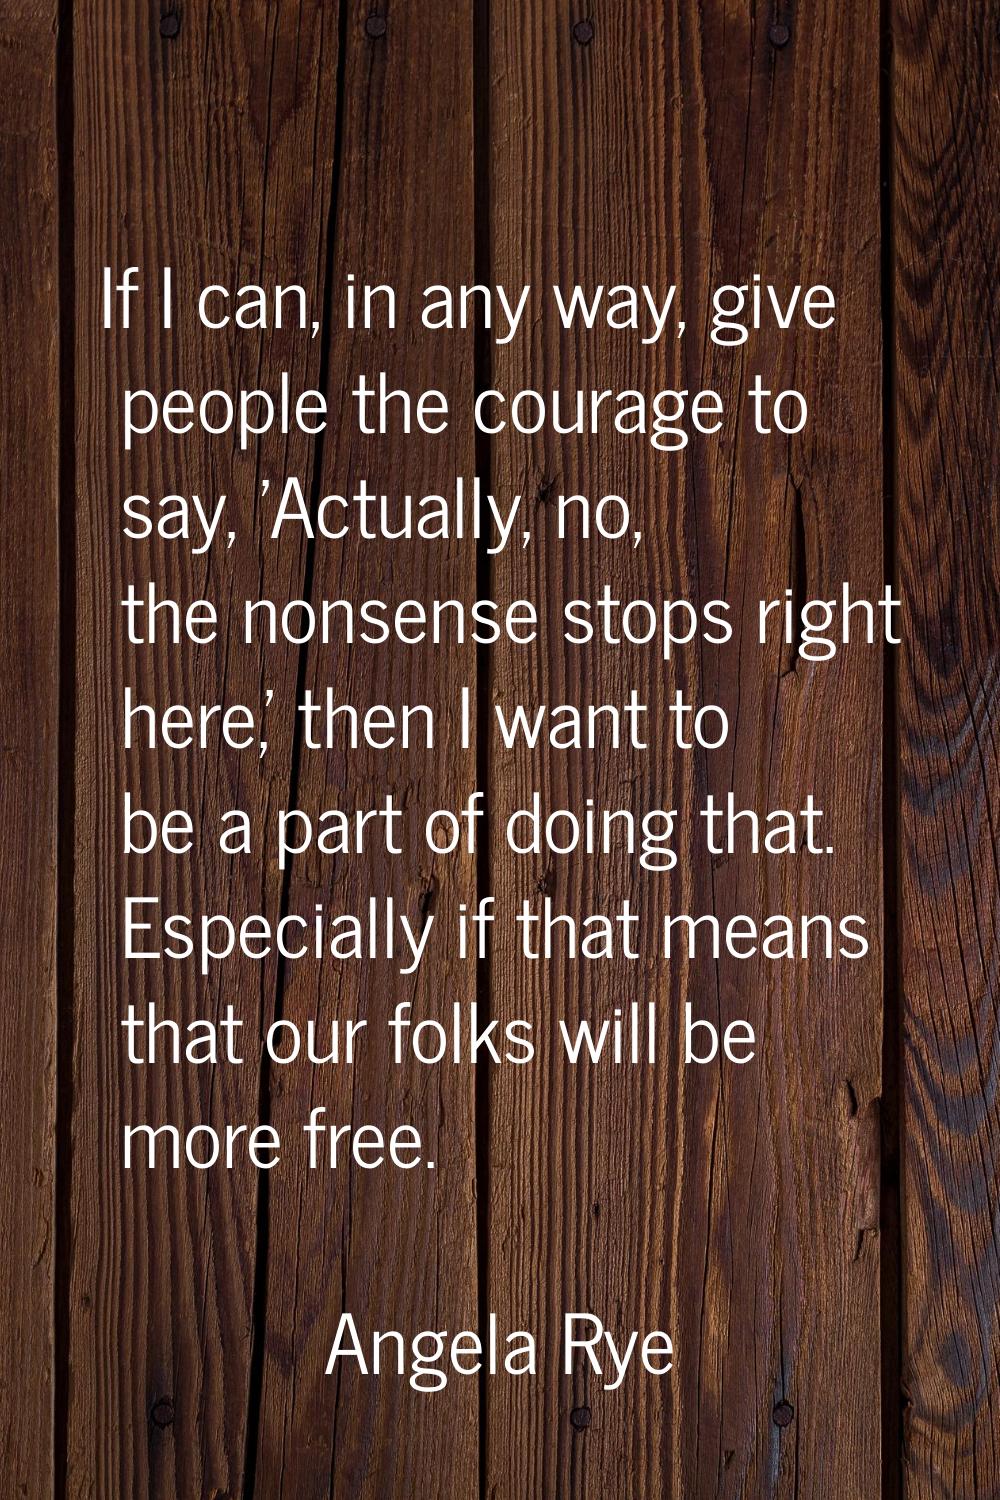 If I can, in any way, give people the courage to say, 'Actually, no, the nonsense stops right here,